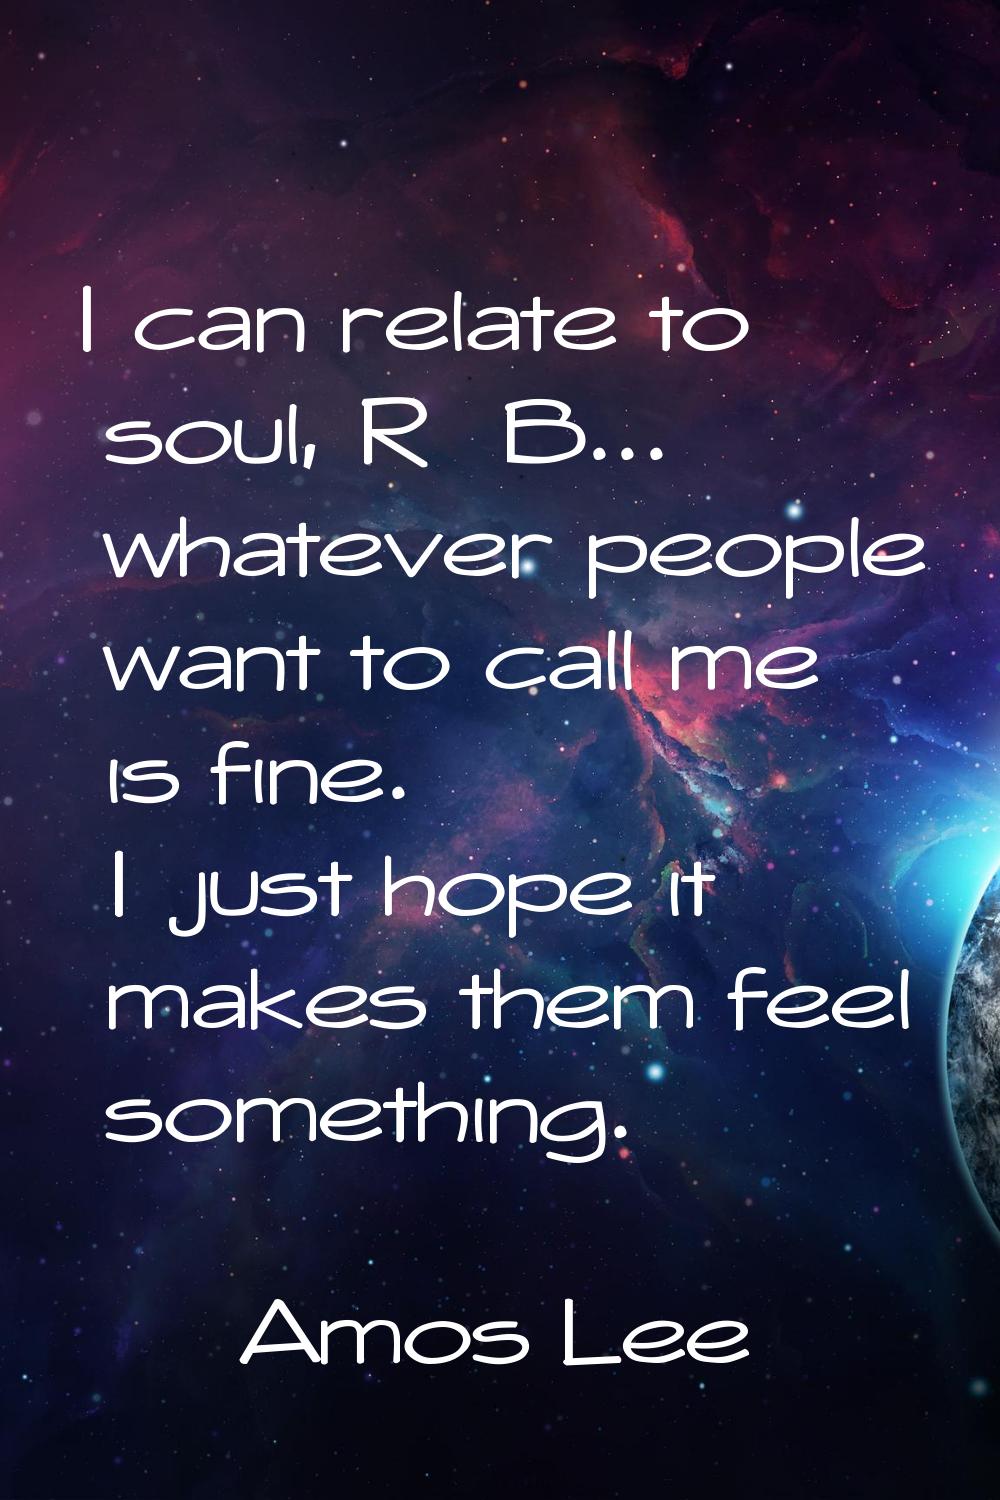 I can relate to soul, R&B... whatever people want to call me is fine. I just hope it makes them fee